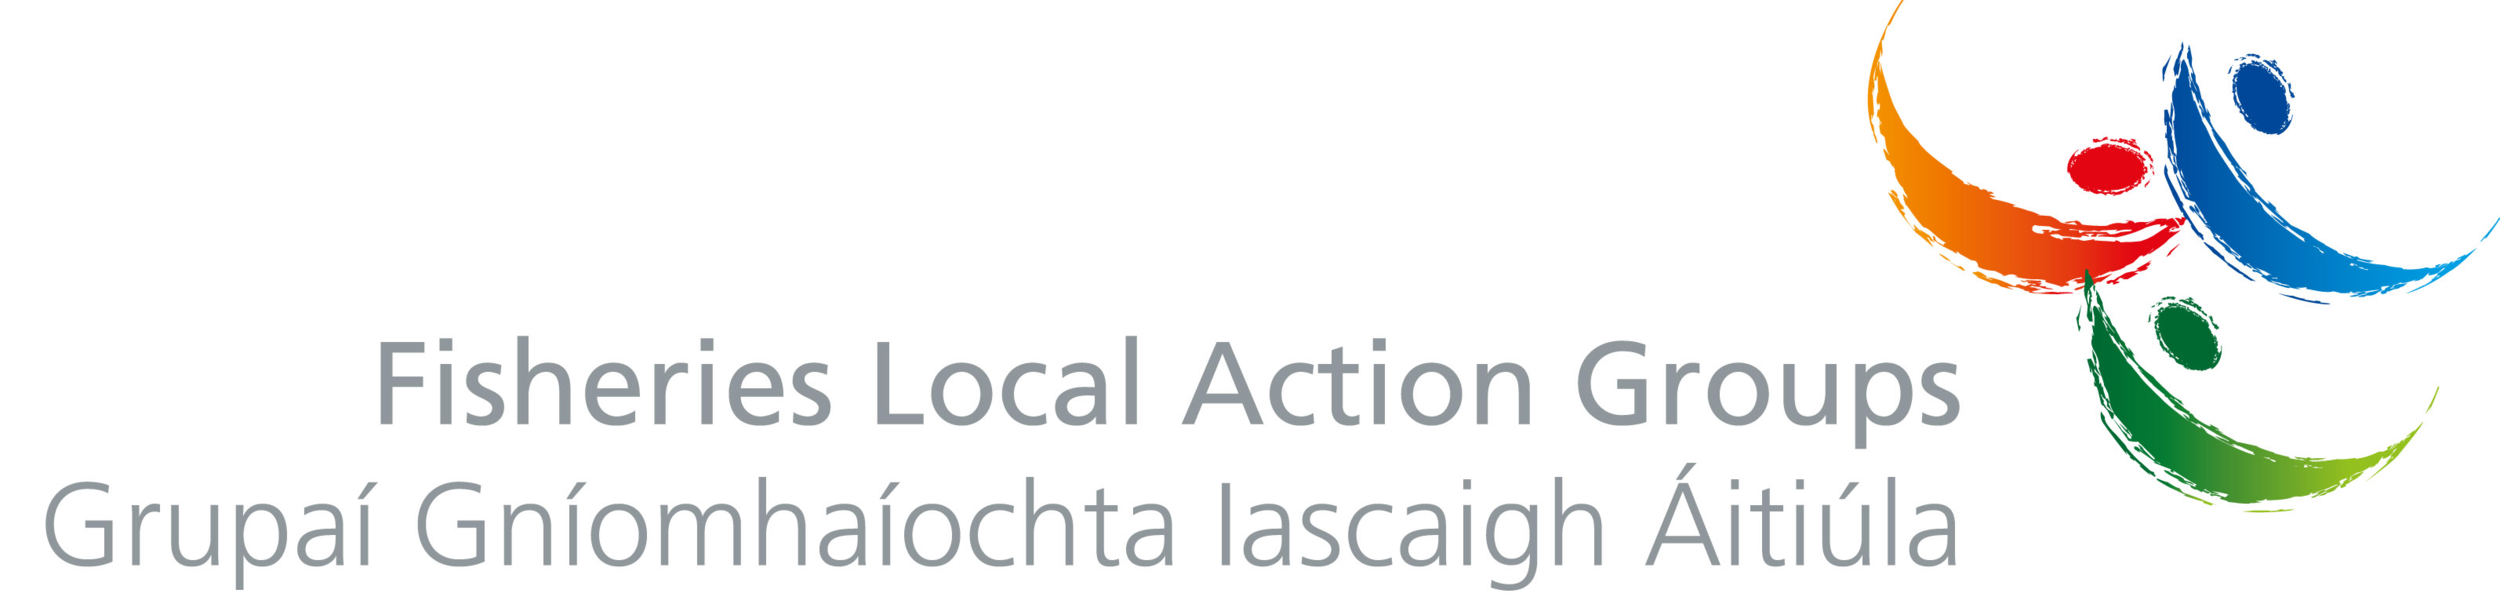 Fisheries local Action Group logo.png